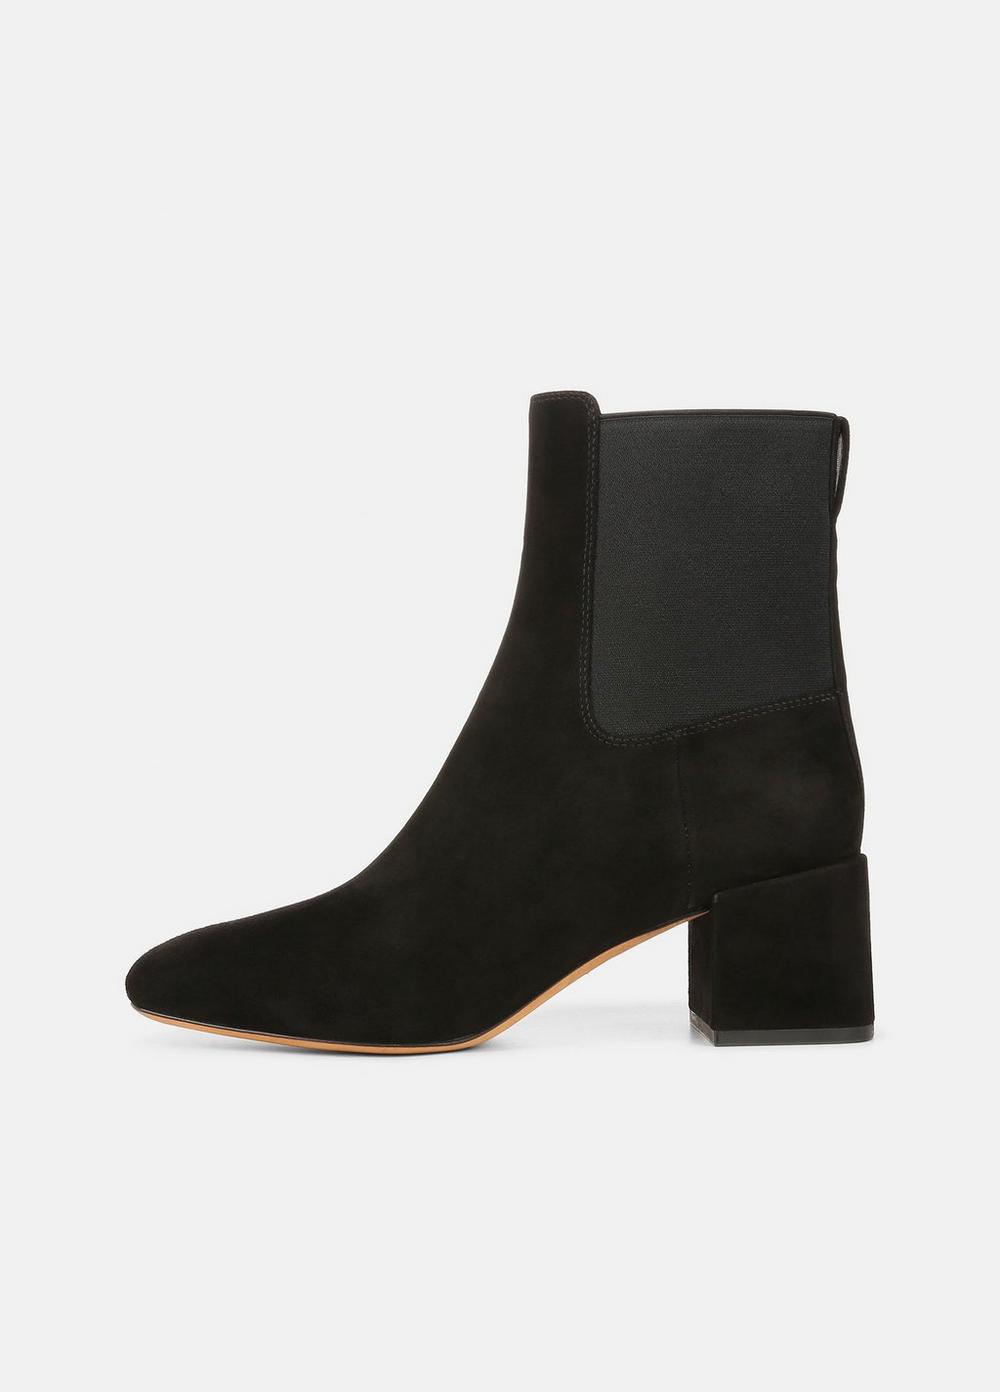 kimmy suede boot, black, size 10 vince